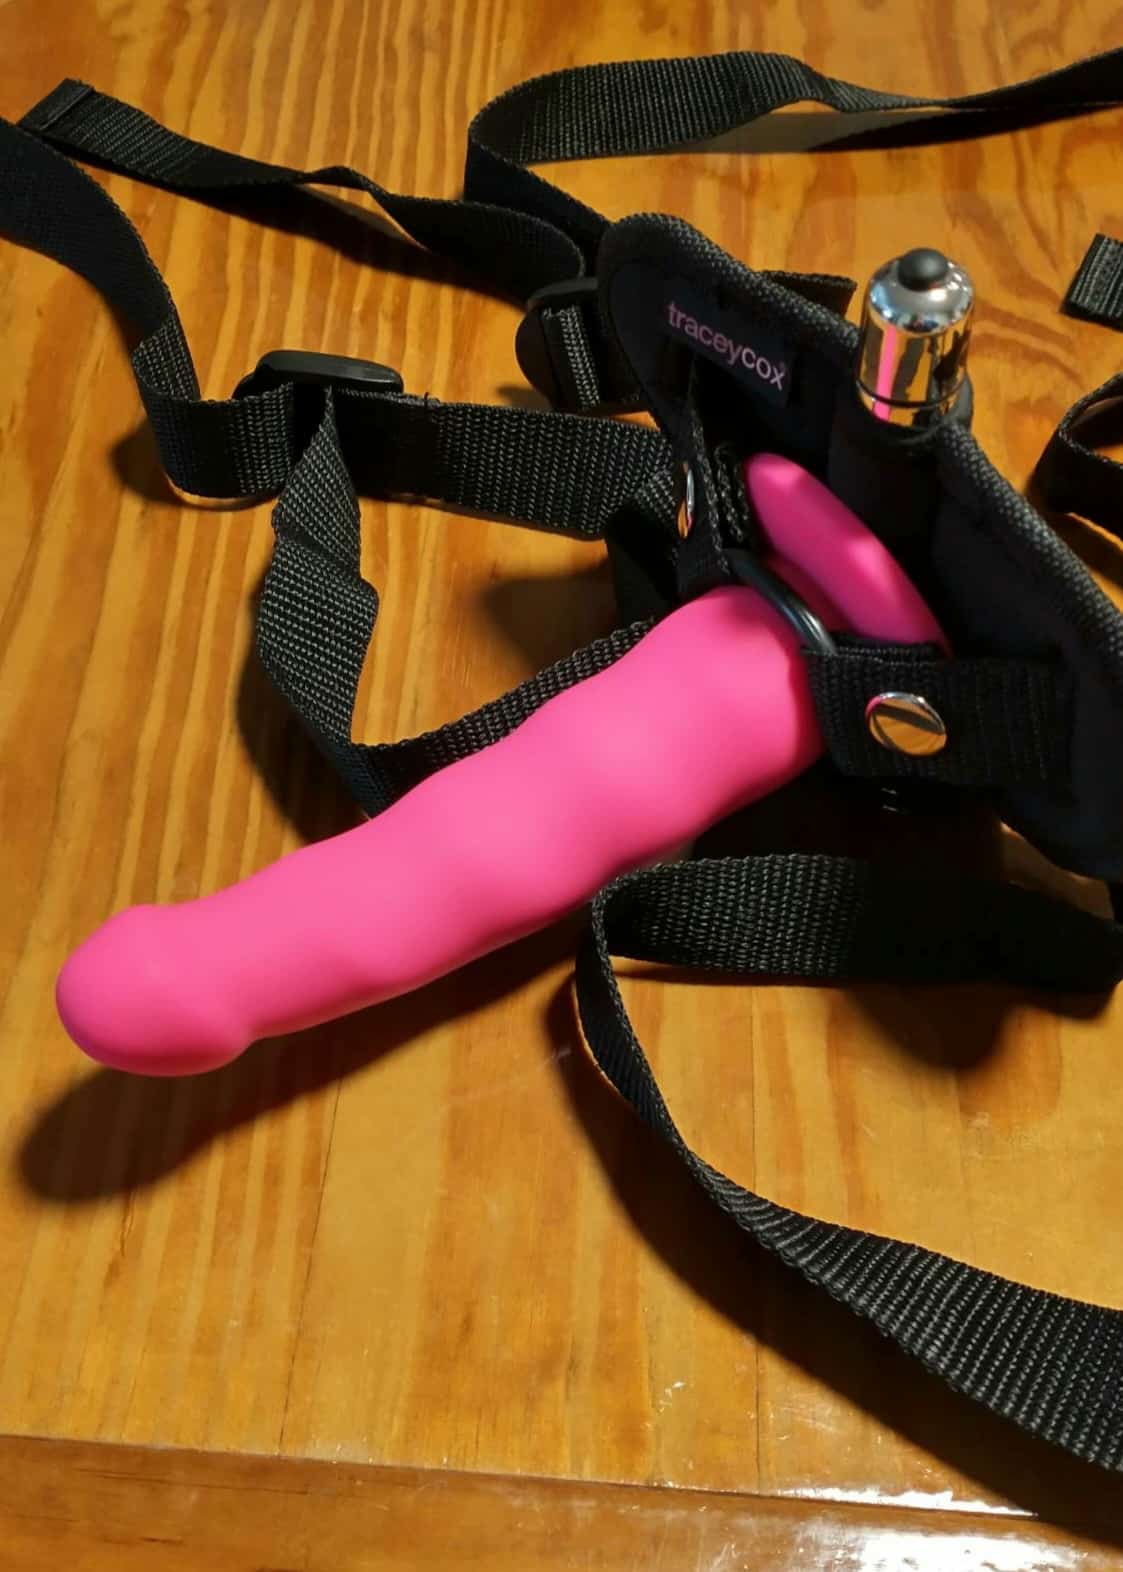 Tracey Cox Supersex Strap-On Pegging Kit . Slide 4